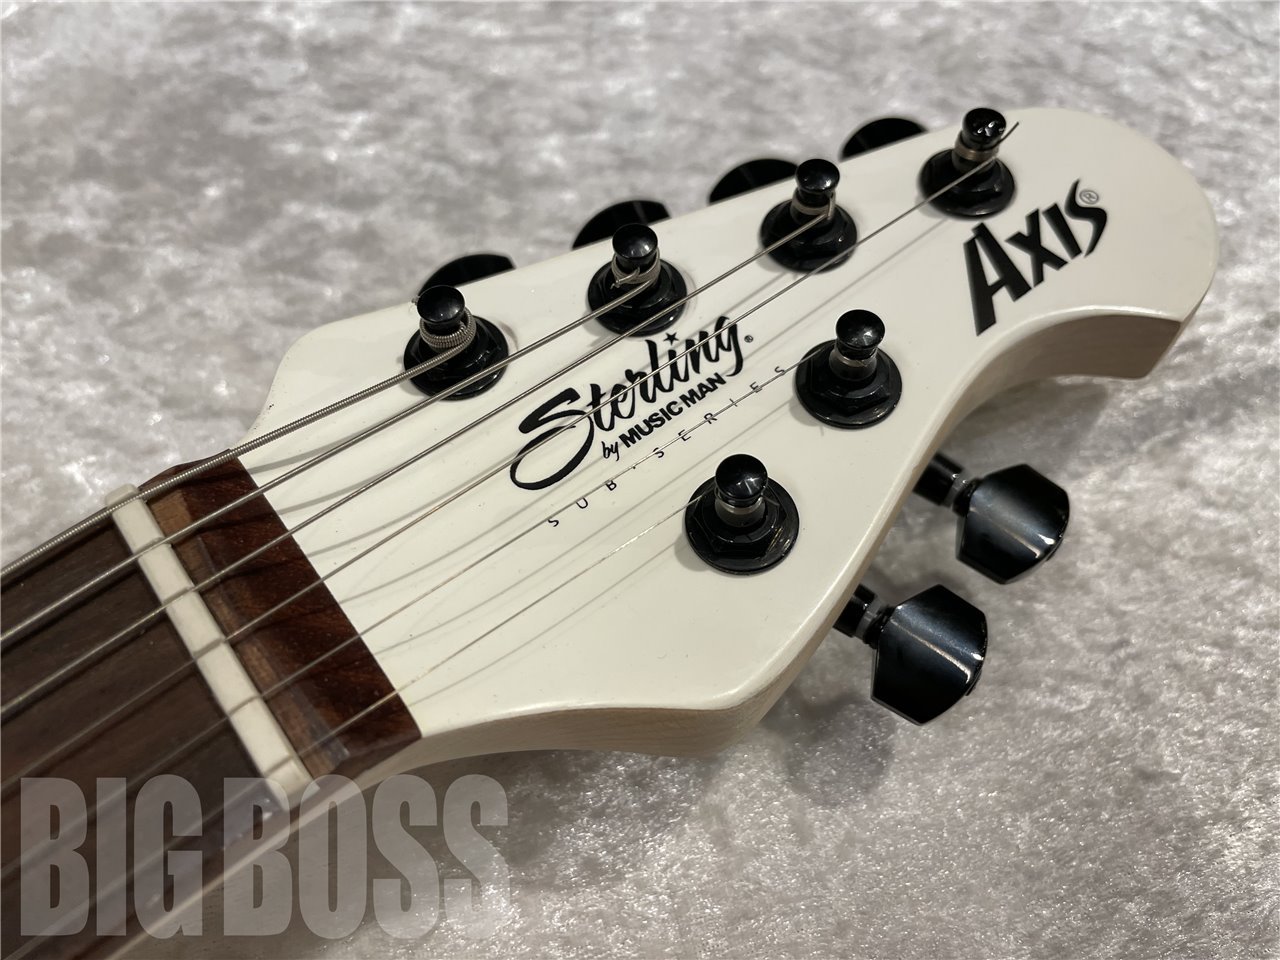 Sterling by MUSIC MAN AXIS AX3S【White】（新品/送料無料）【楽器